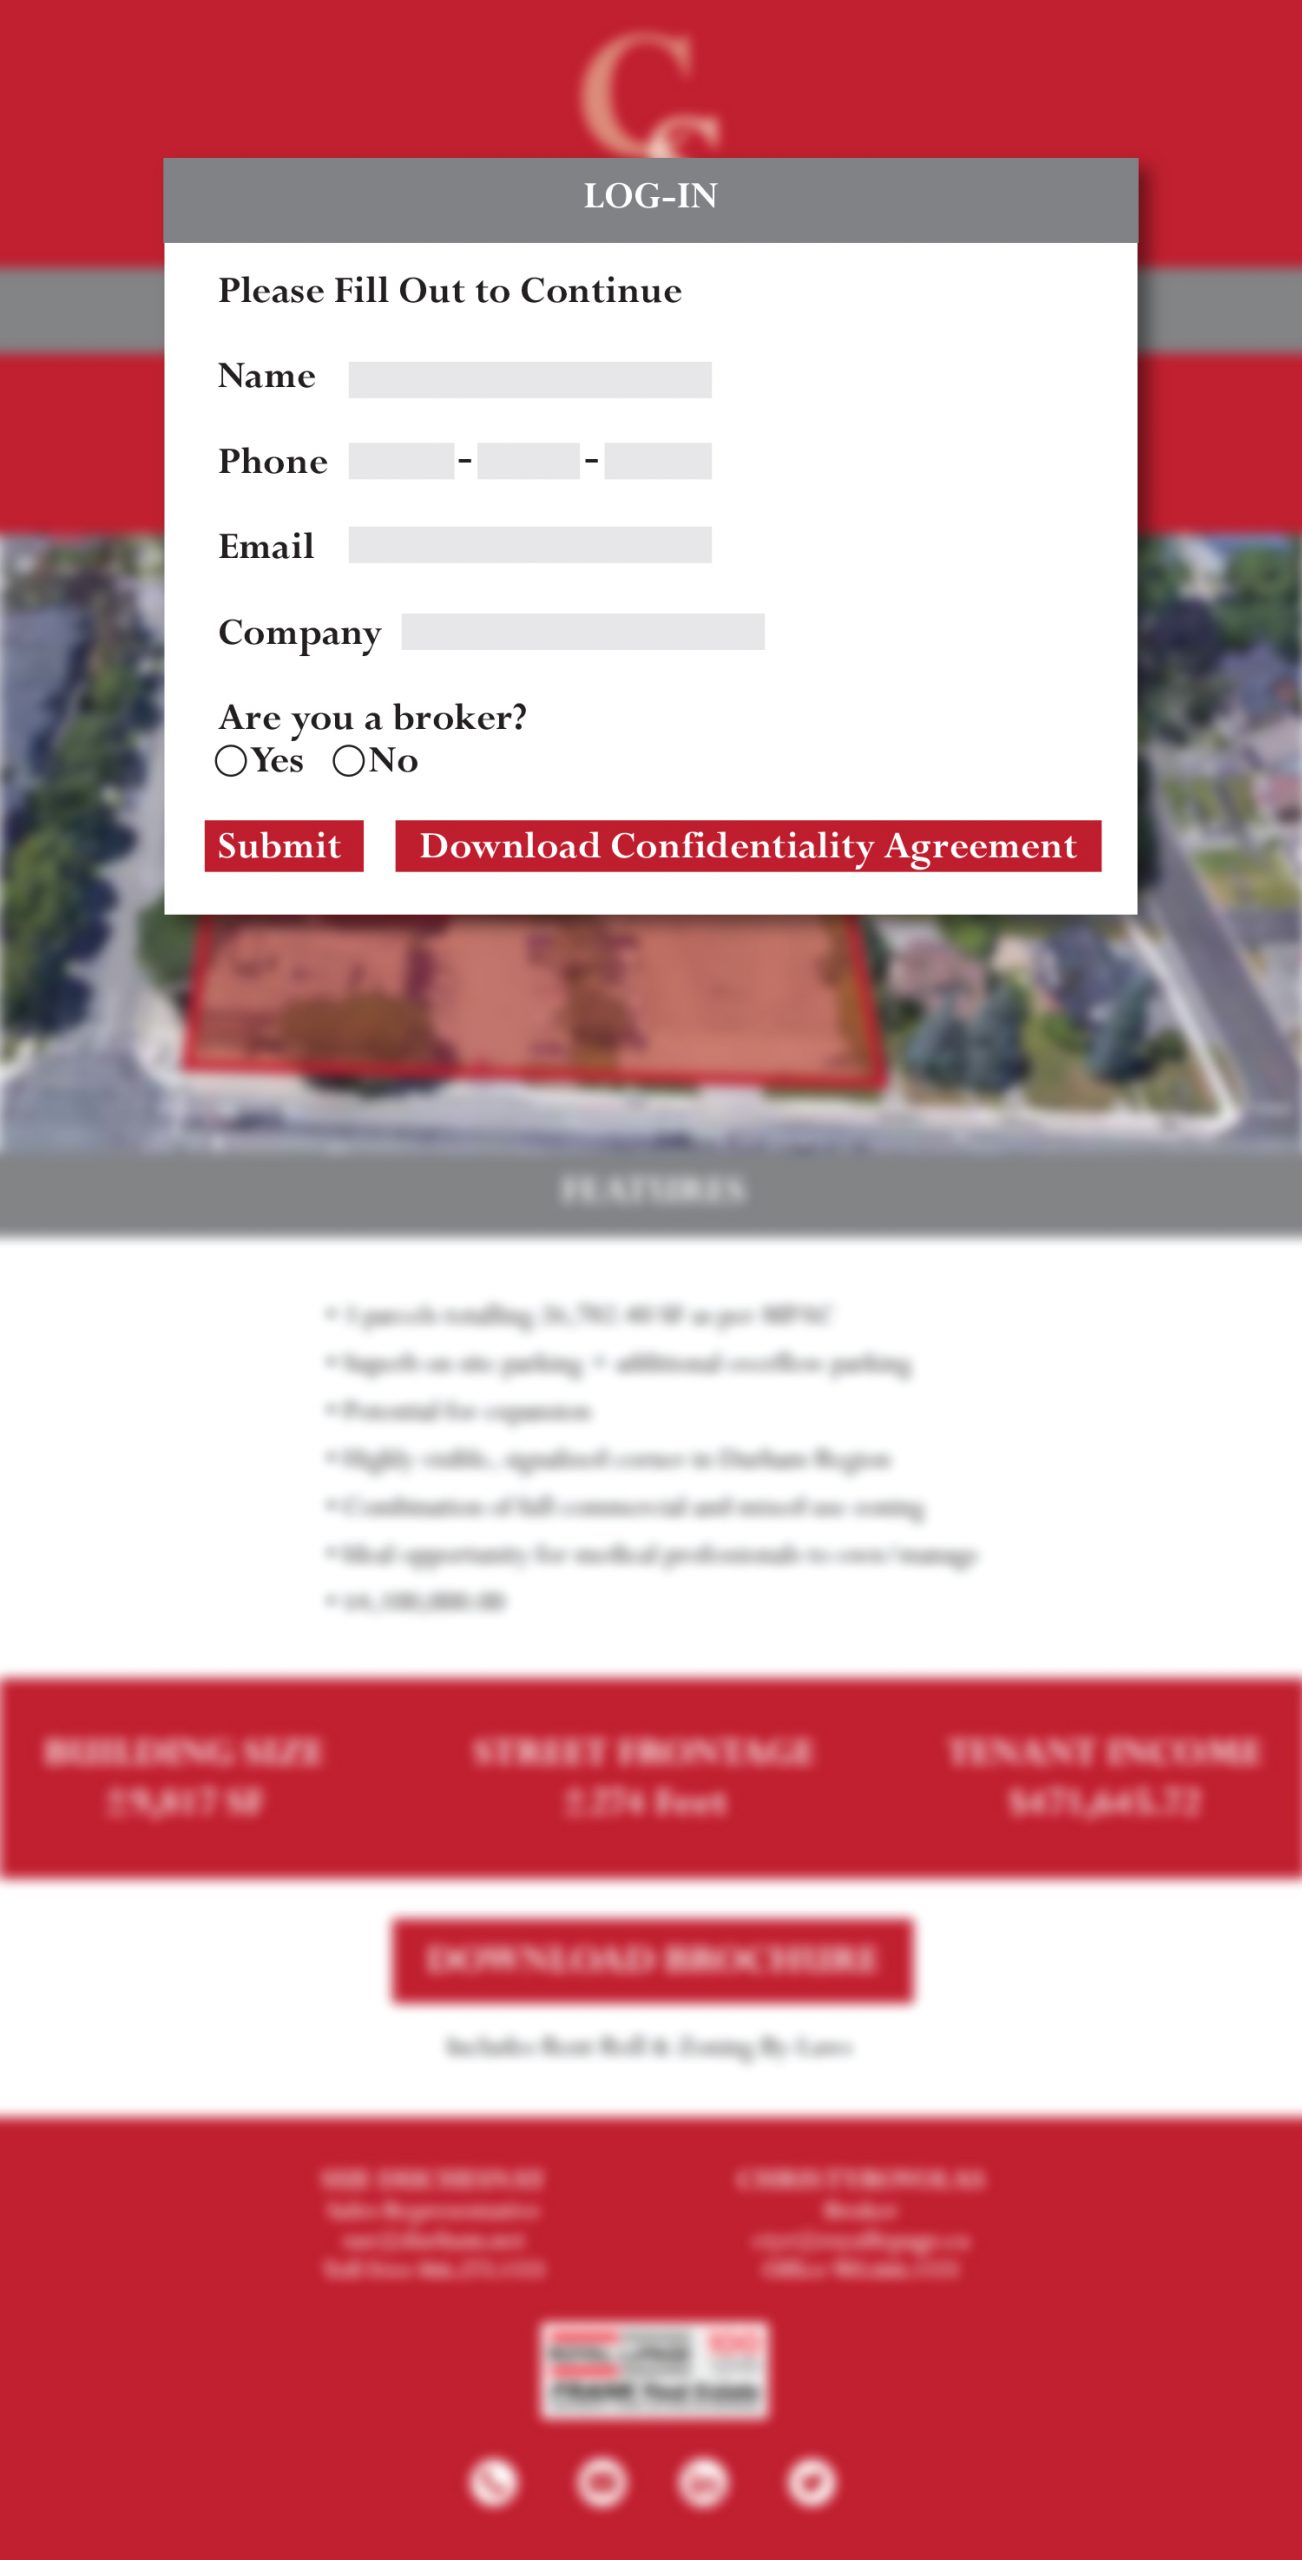 200 Brock Street - Landing Page - Confidentiality Agreement